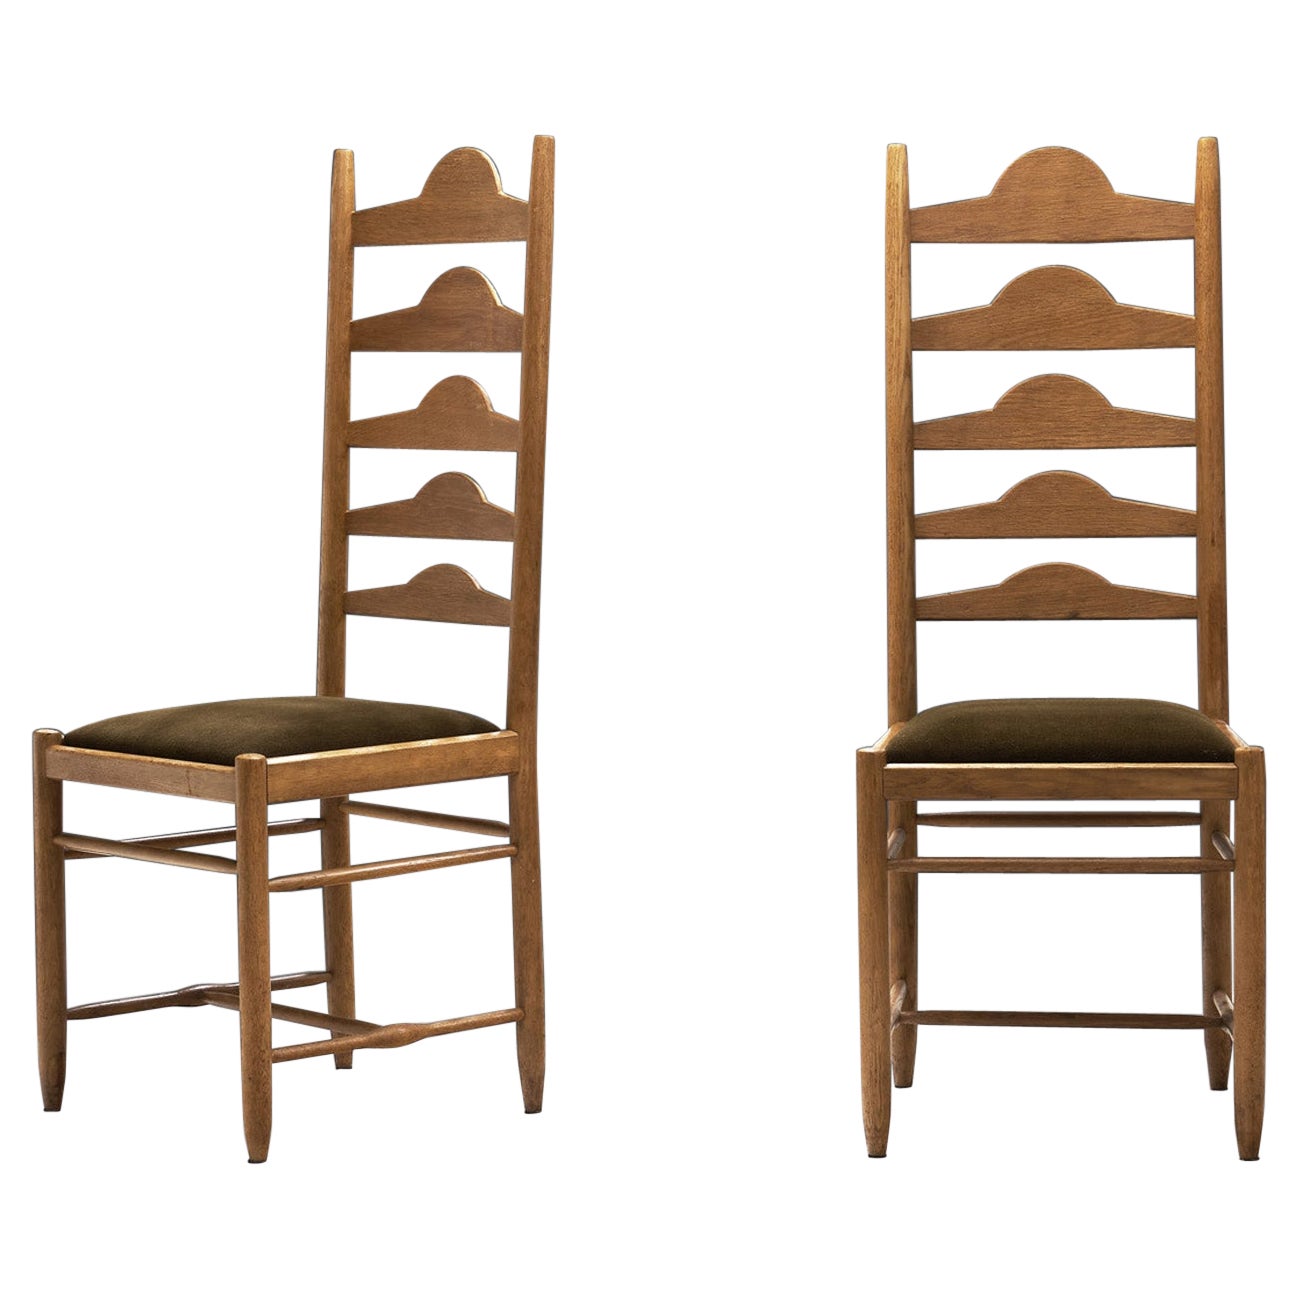 Sculptural Ladder-Back Chairs, Europe first half of the 20th century For Sale